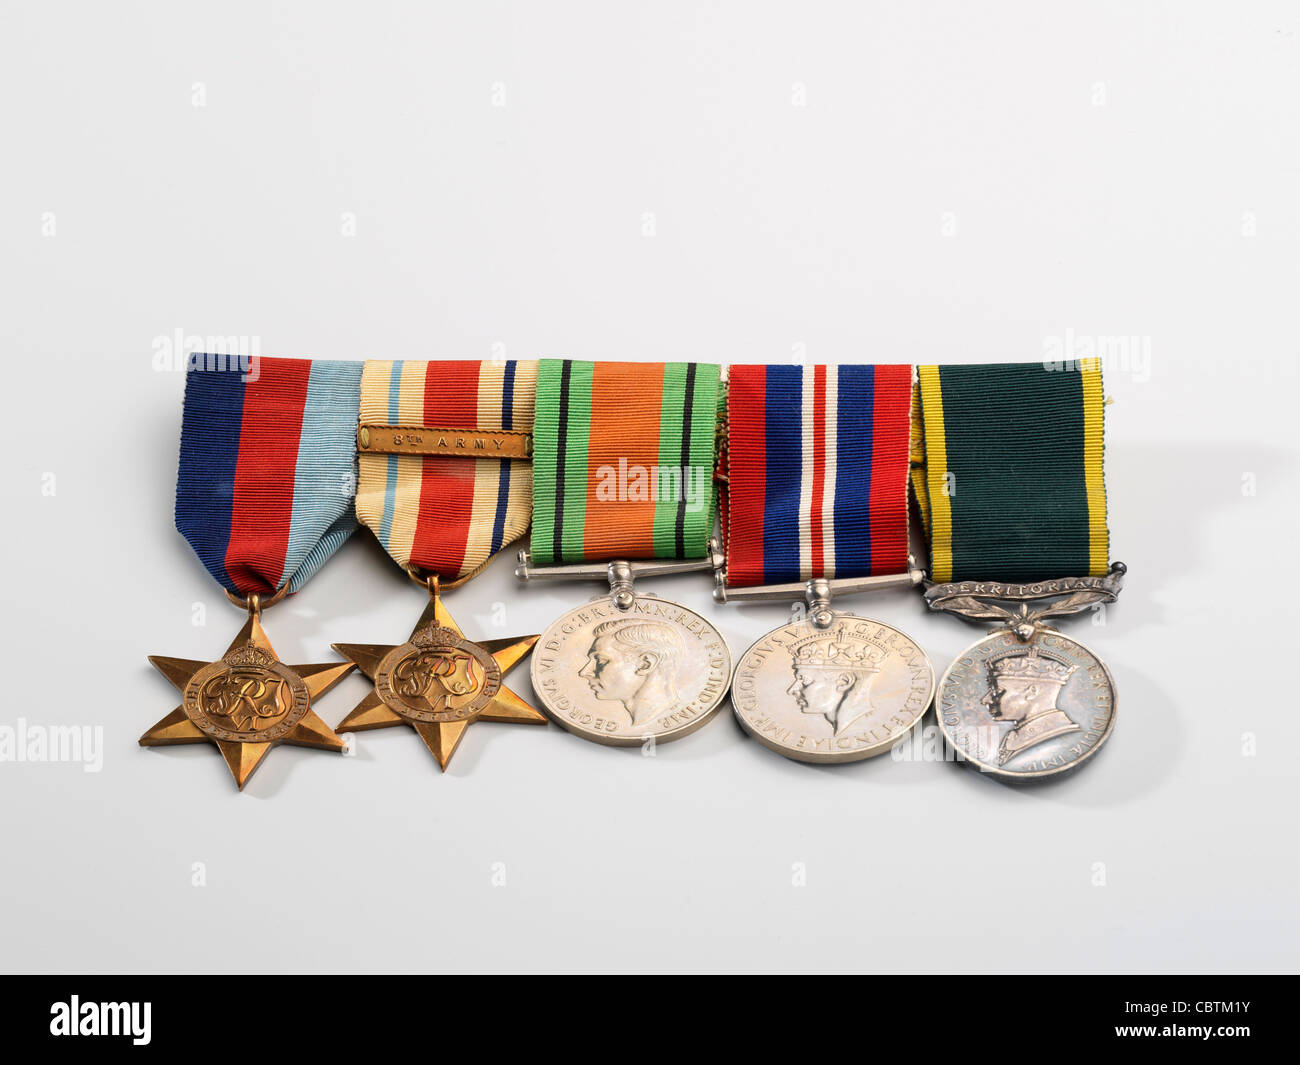 Medals awarded during WW2, including the 8th Army Africa Star, The Defence Medal, and The Territorial Army Medal. Stock Photo